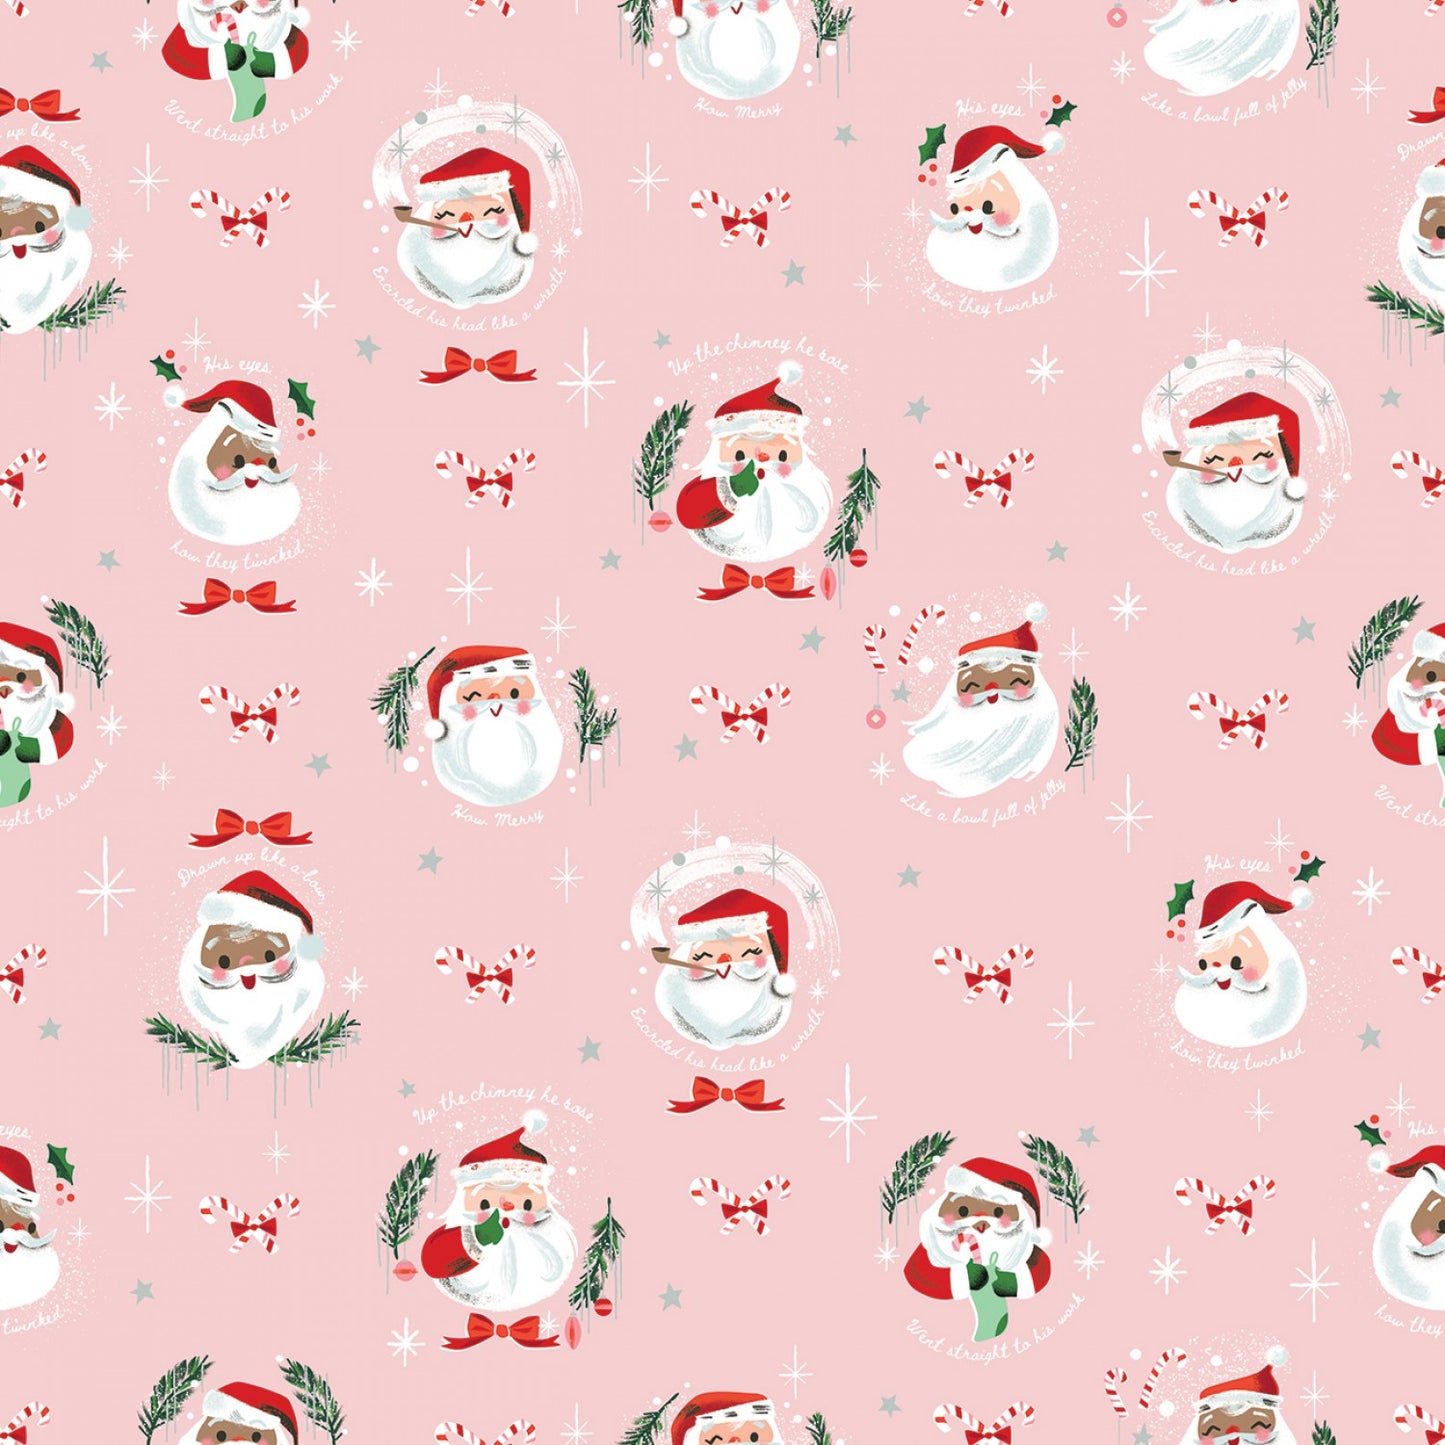 Manufacturer: Riley Blake Designs Designer: Jill Howarth Collection: Twas Print Name: Jolly Old Elf in Pink Material: 100% Cotton Weight: Quilting SKU: SC13462R-PINK Width: 44 inches